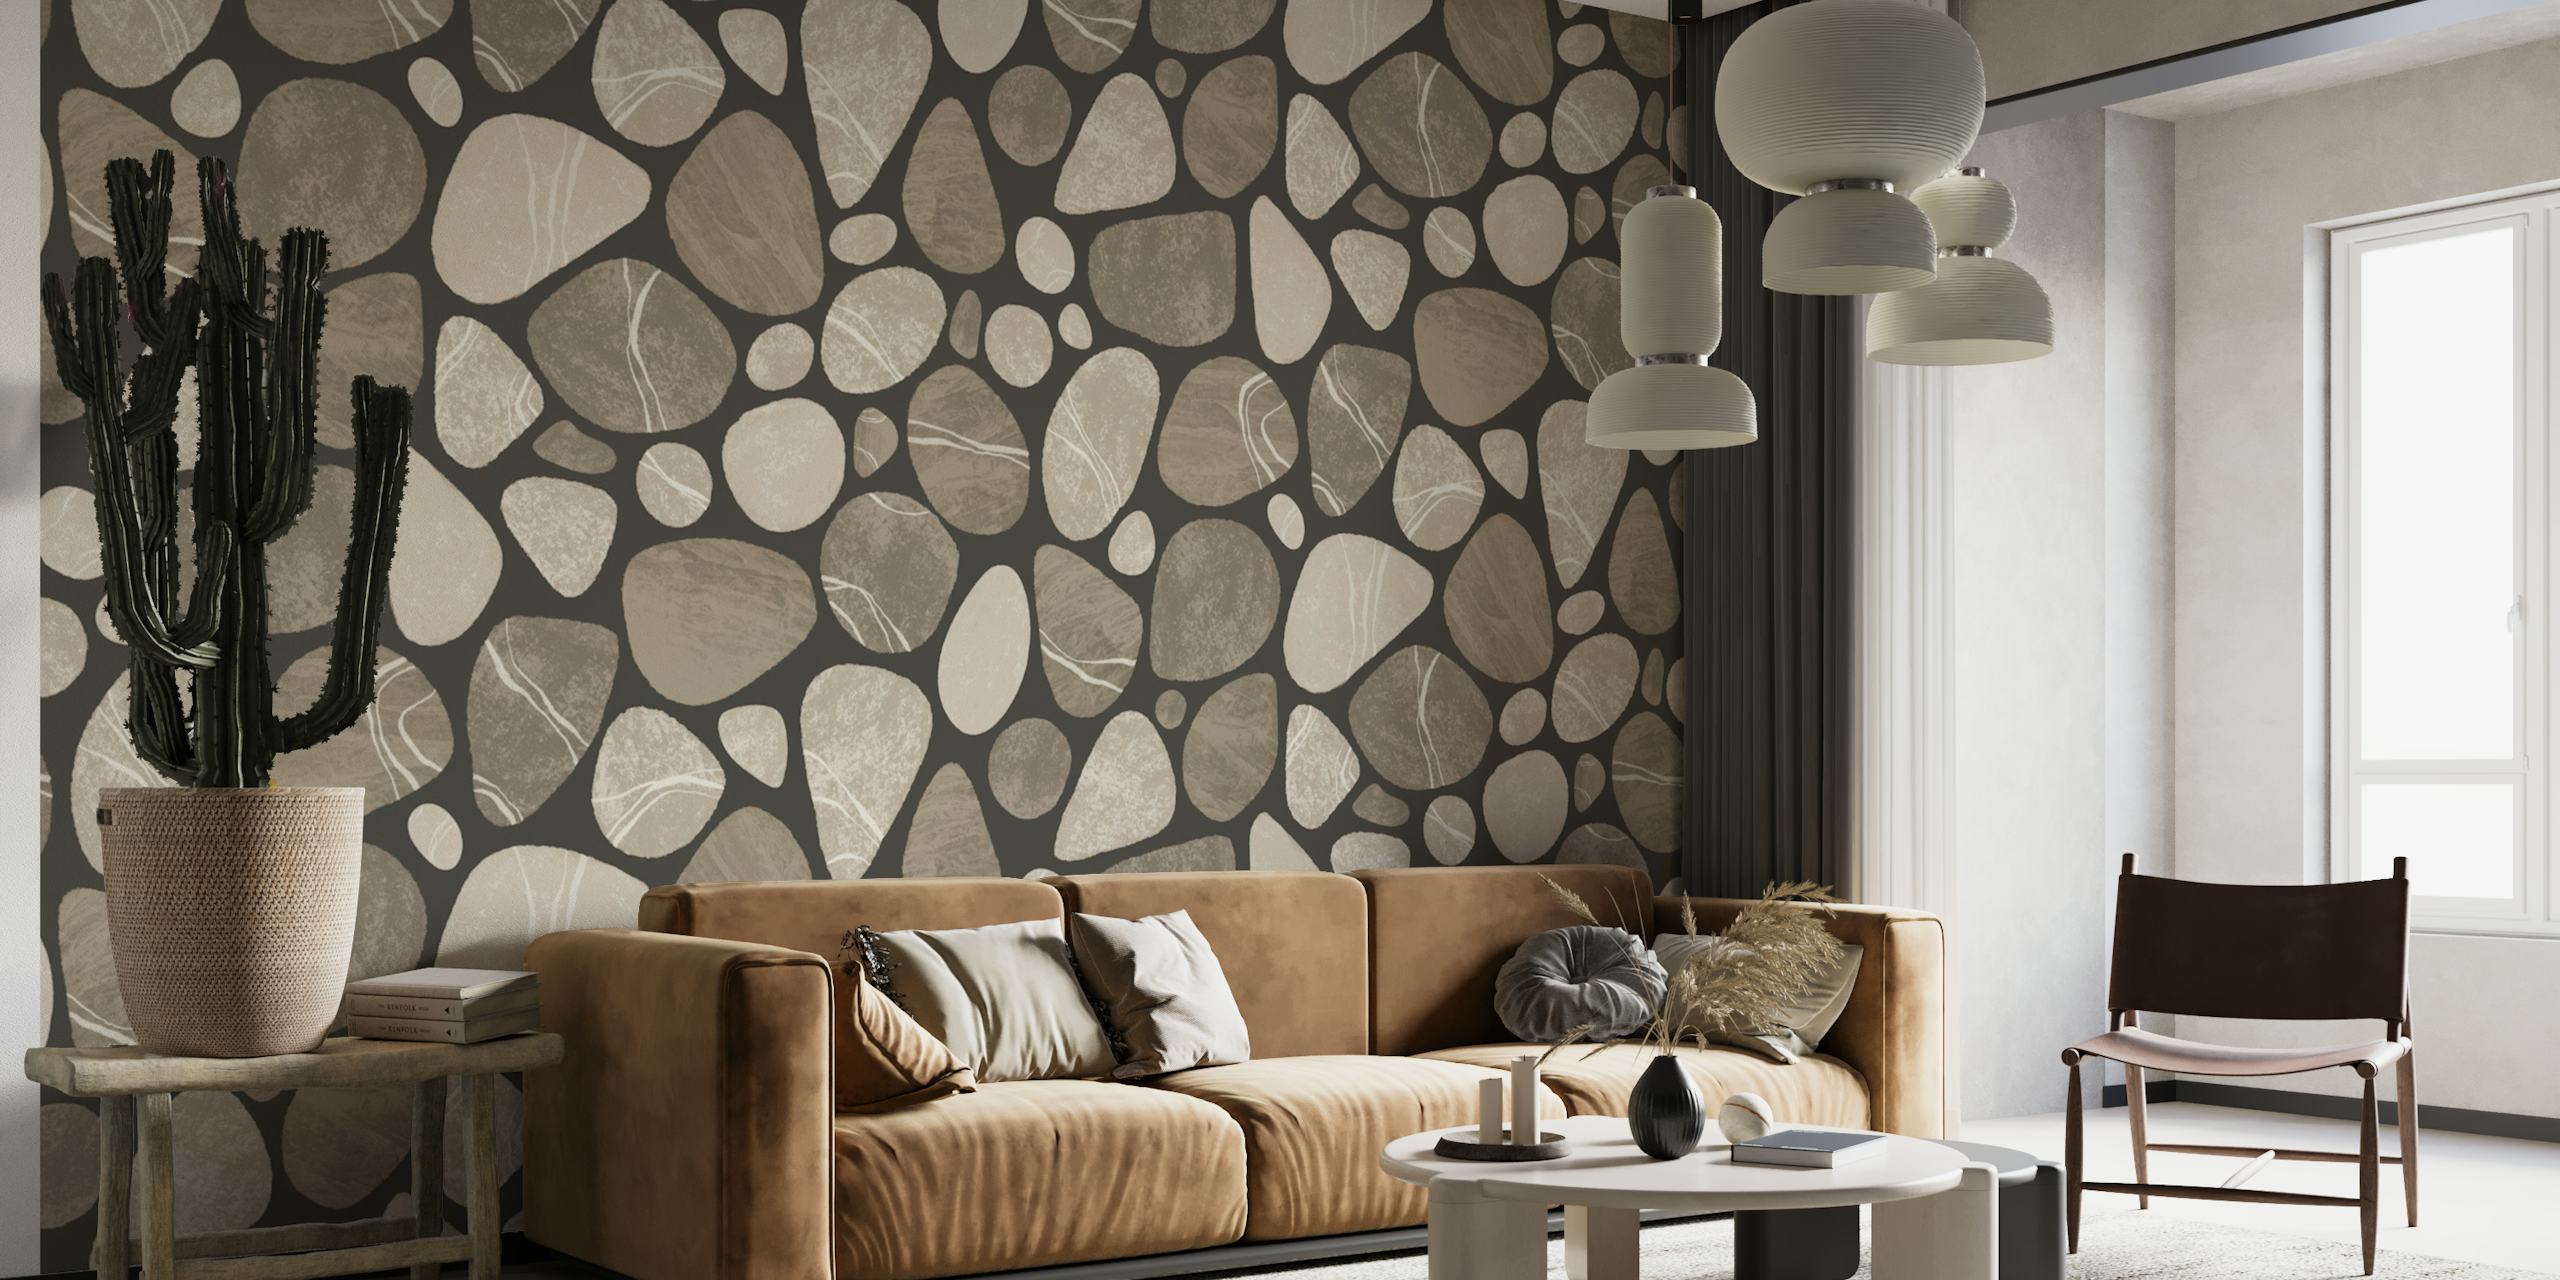 Pebble Serenity Stone Pattern Beauty Of Nature In Neutral Brown Beige Colors papel de parede